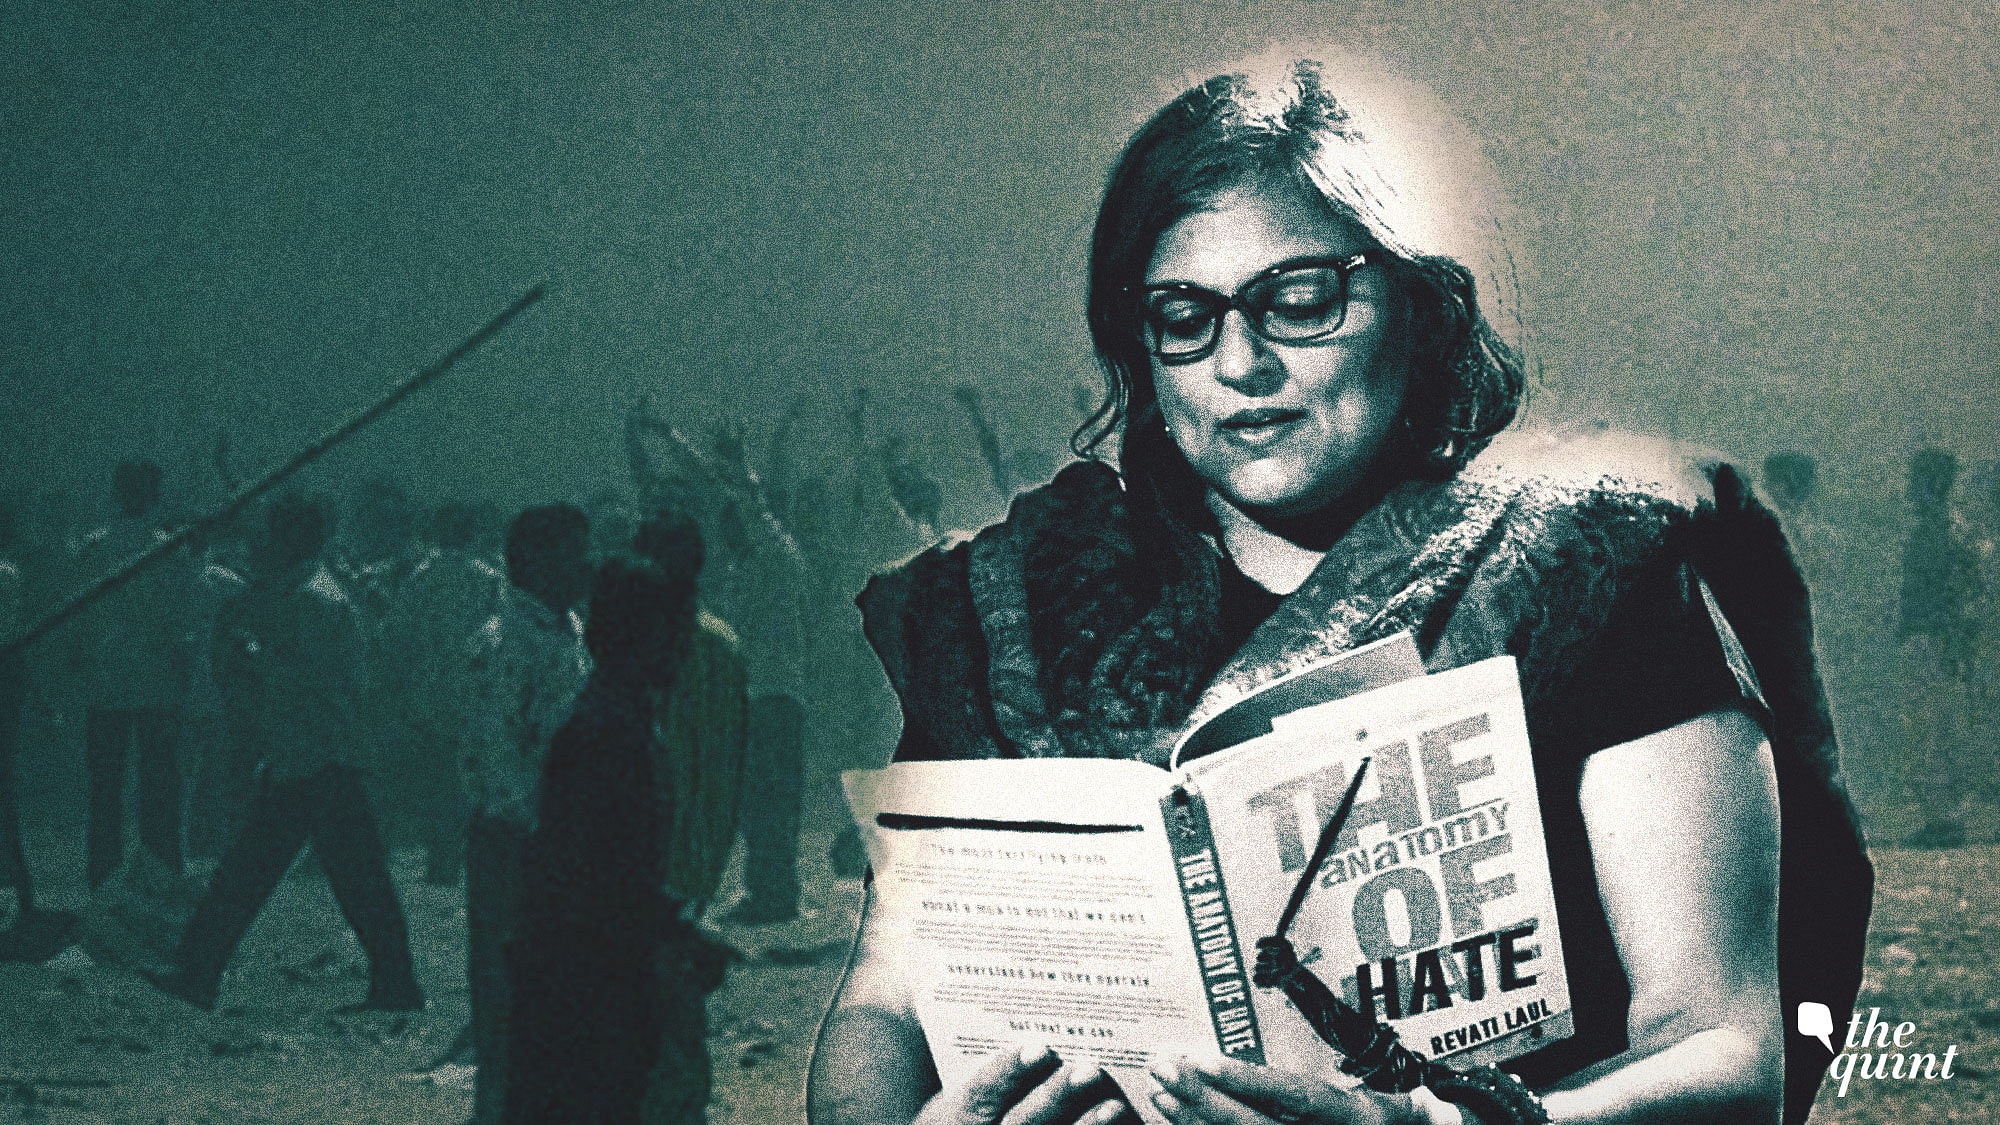 Image of author Revati Laul with her book, used for representational purposes.